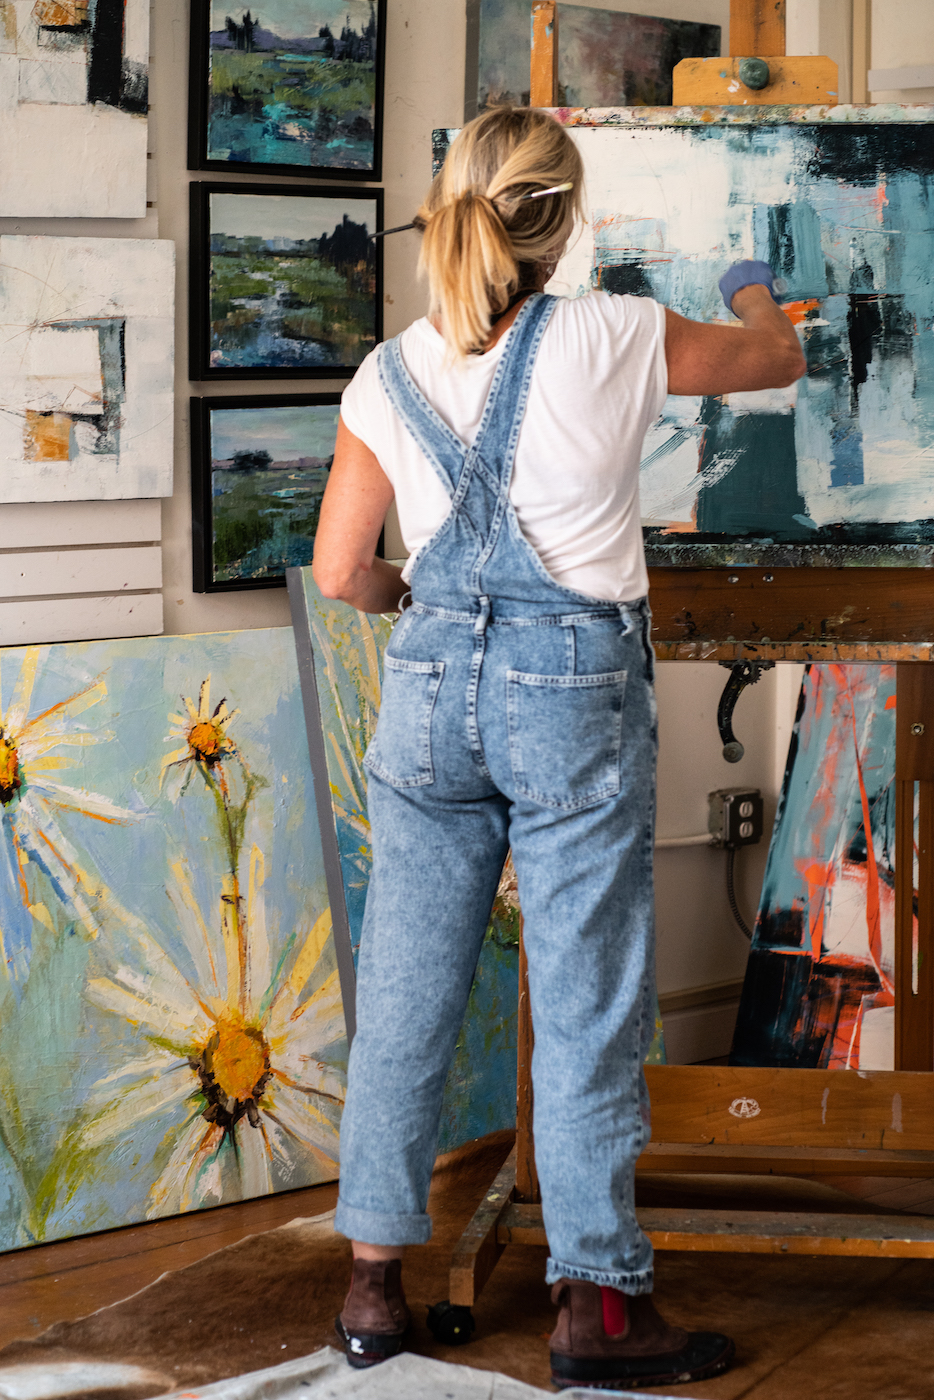 Kim Gibbs standing and painting with her back to the camera